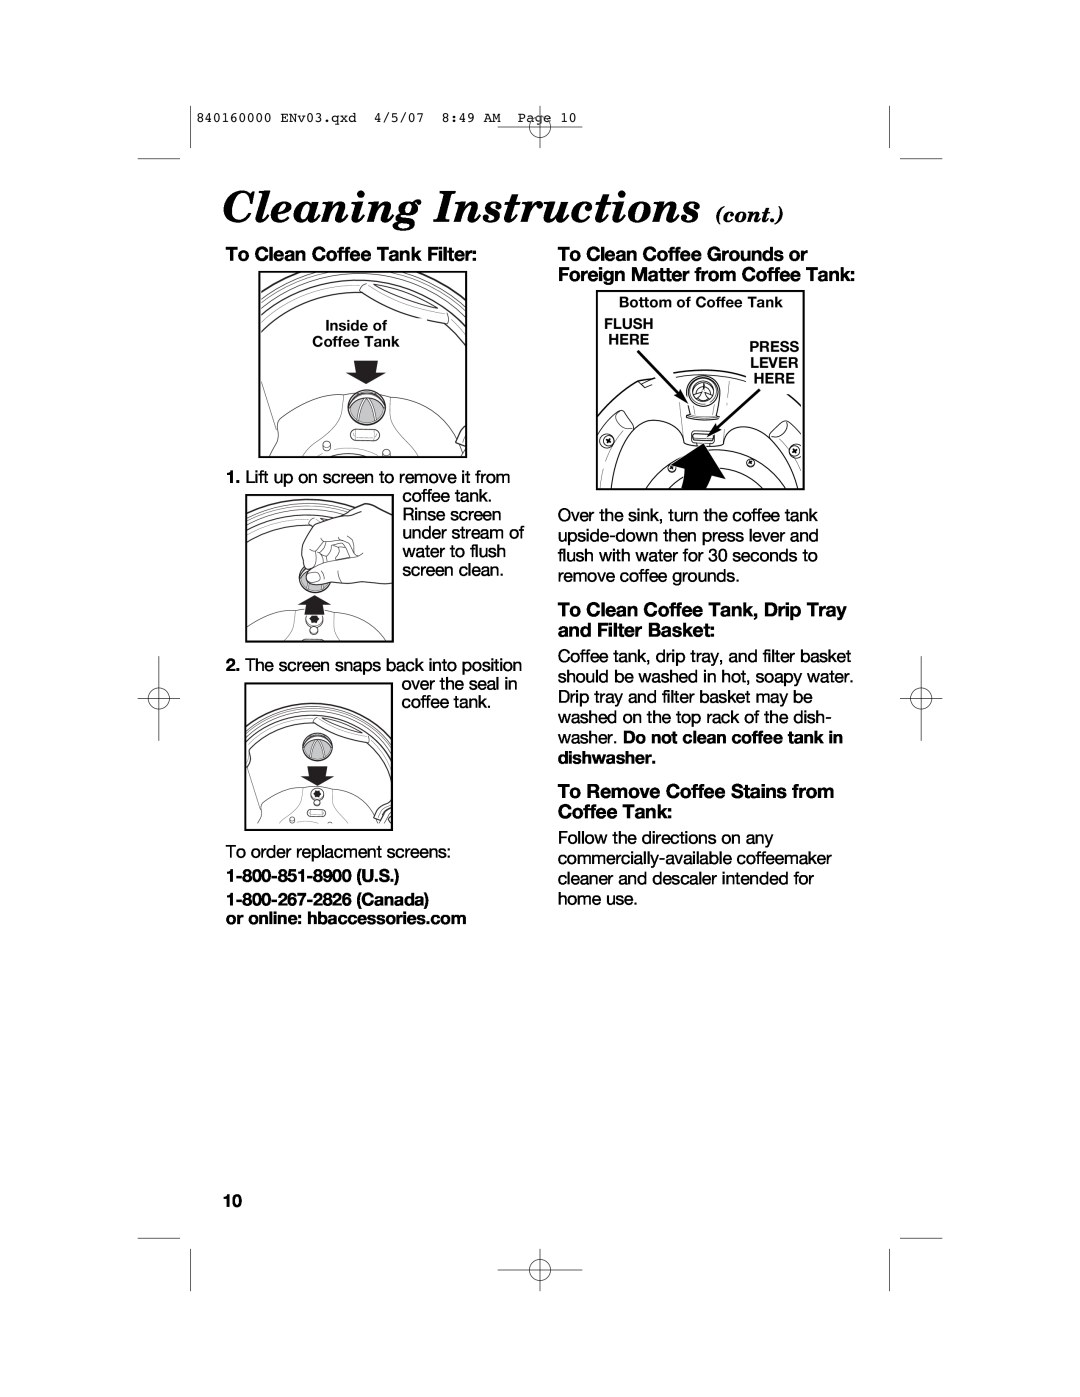 Hamilton Beach D43012B Cleaning Instructions cont, To Clean Coffee Tank Filter, To Remove Coffee Stains from Coffee Tank 